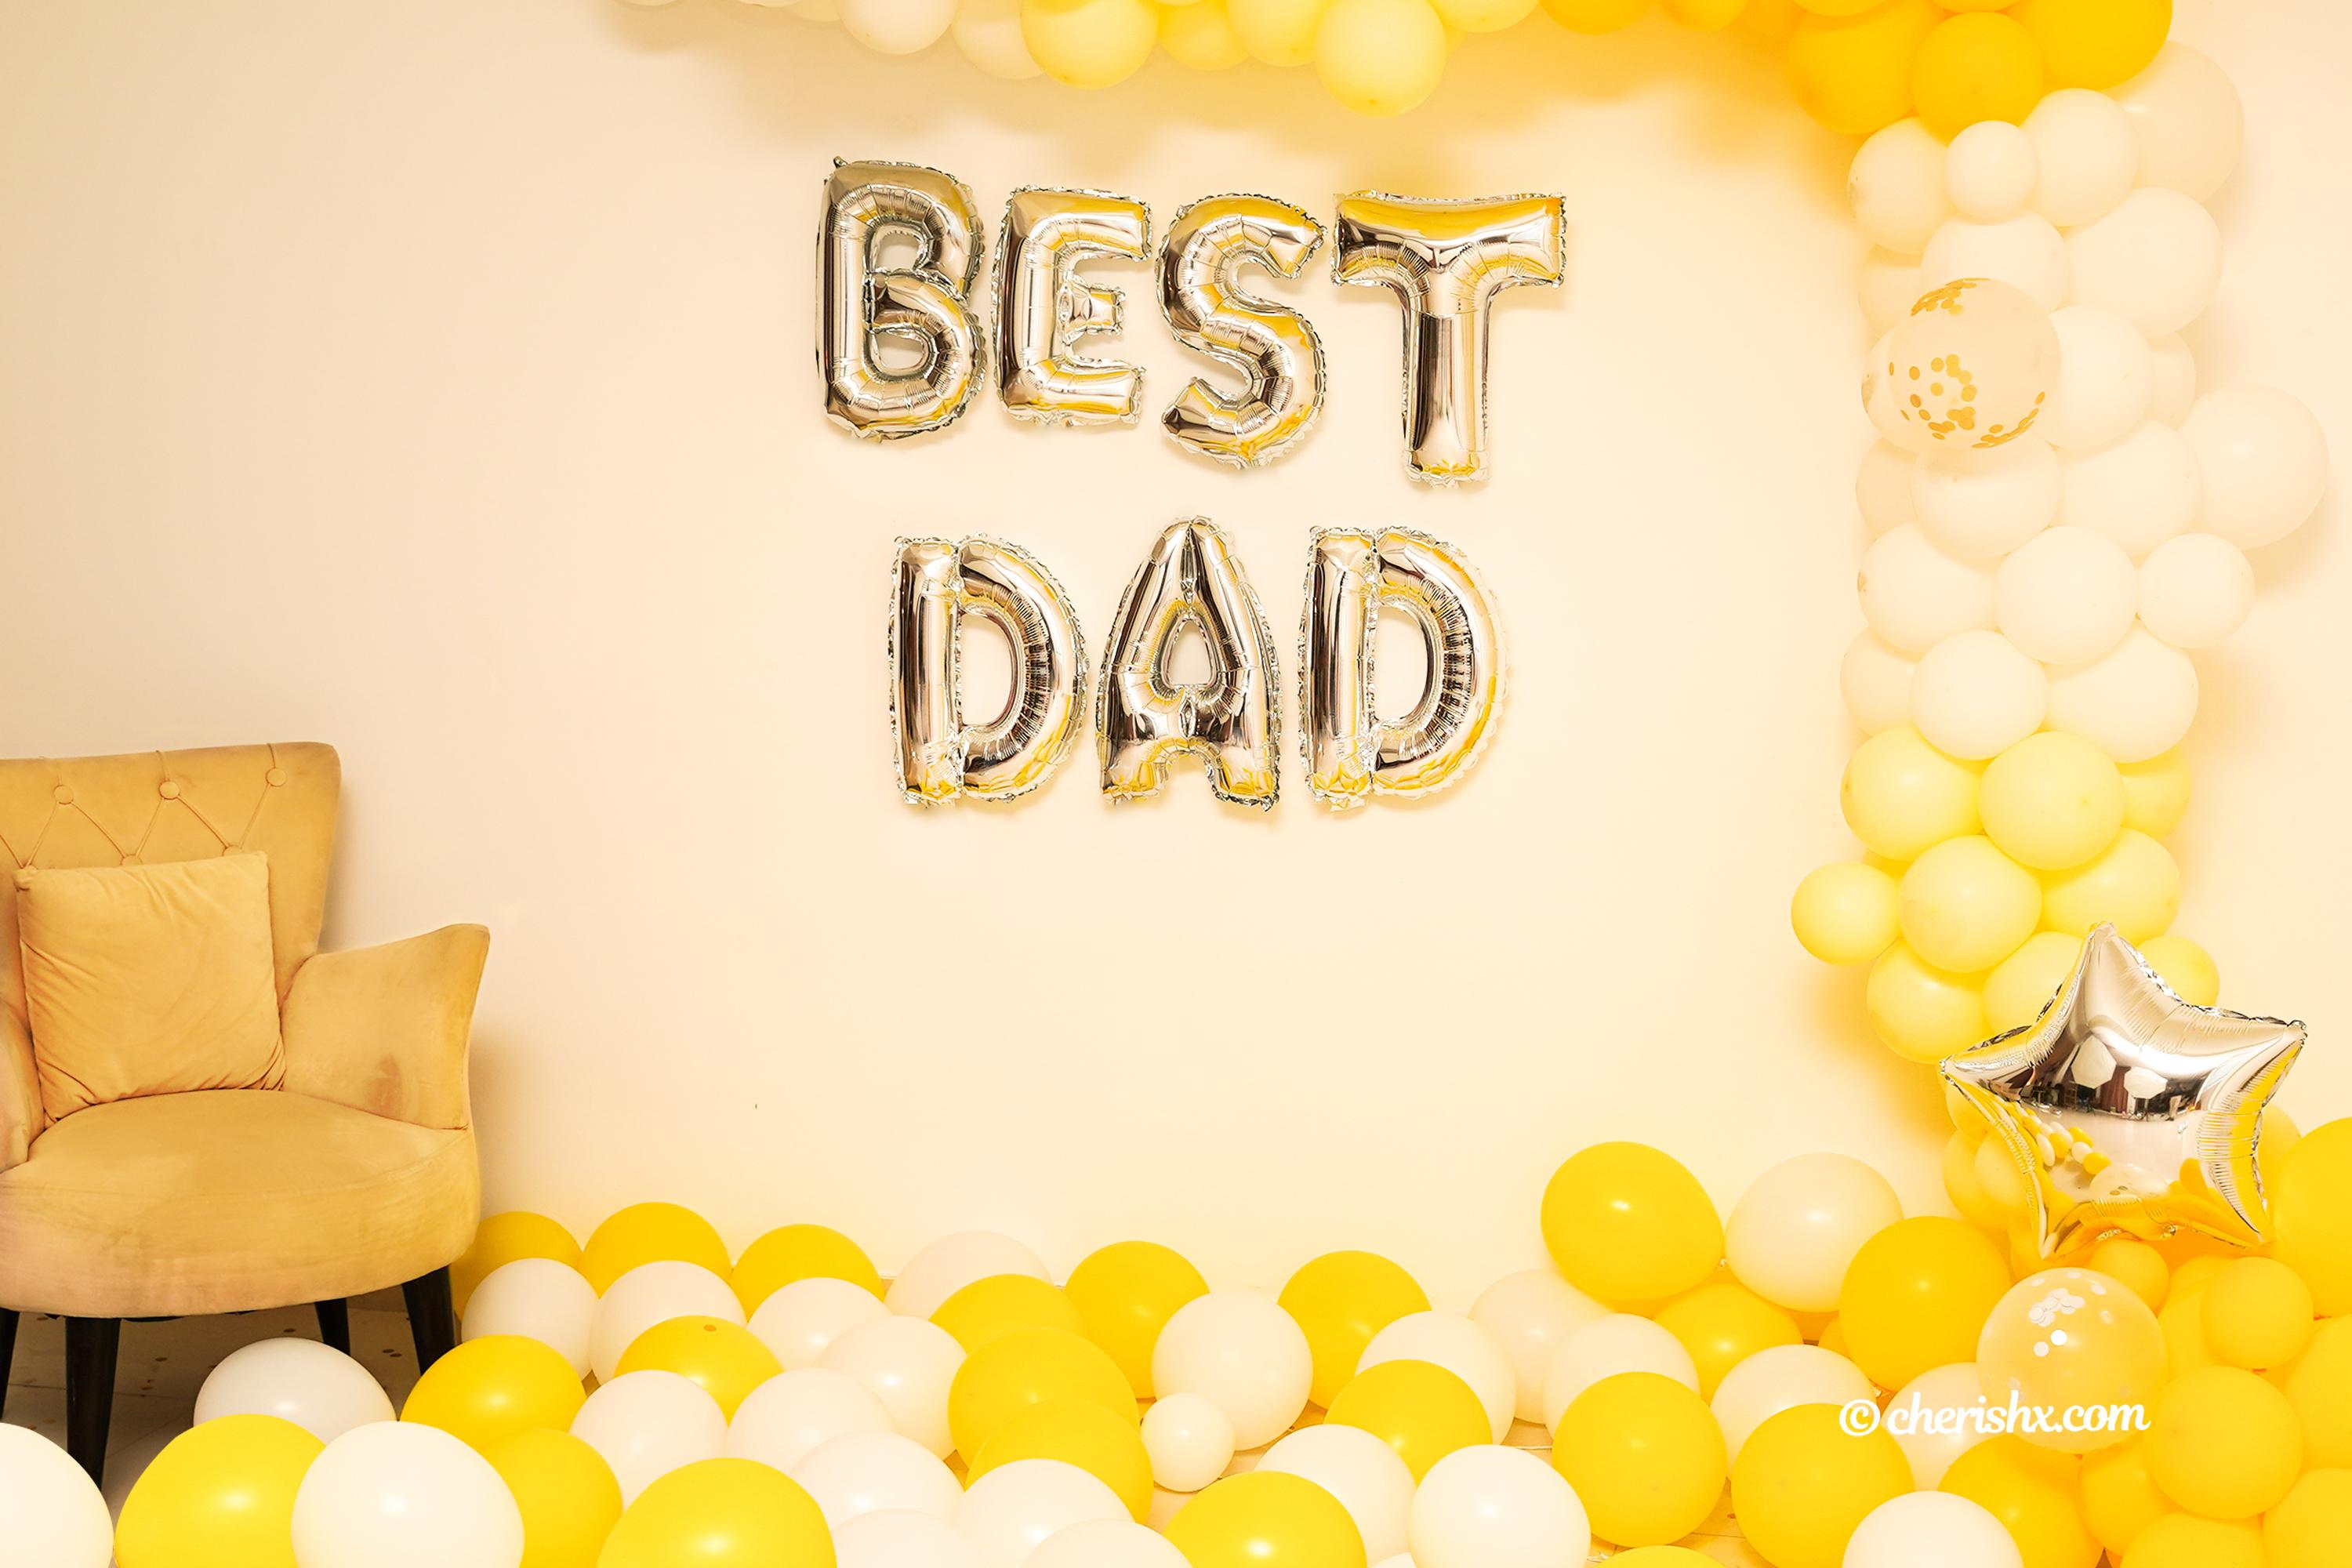 CherishX offers you the best dad decoration to surprise your dad!